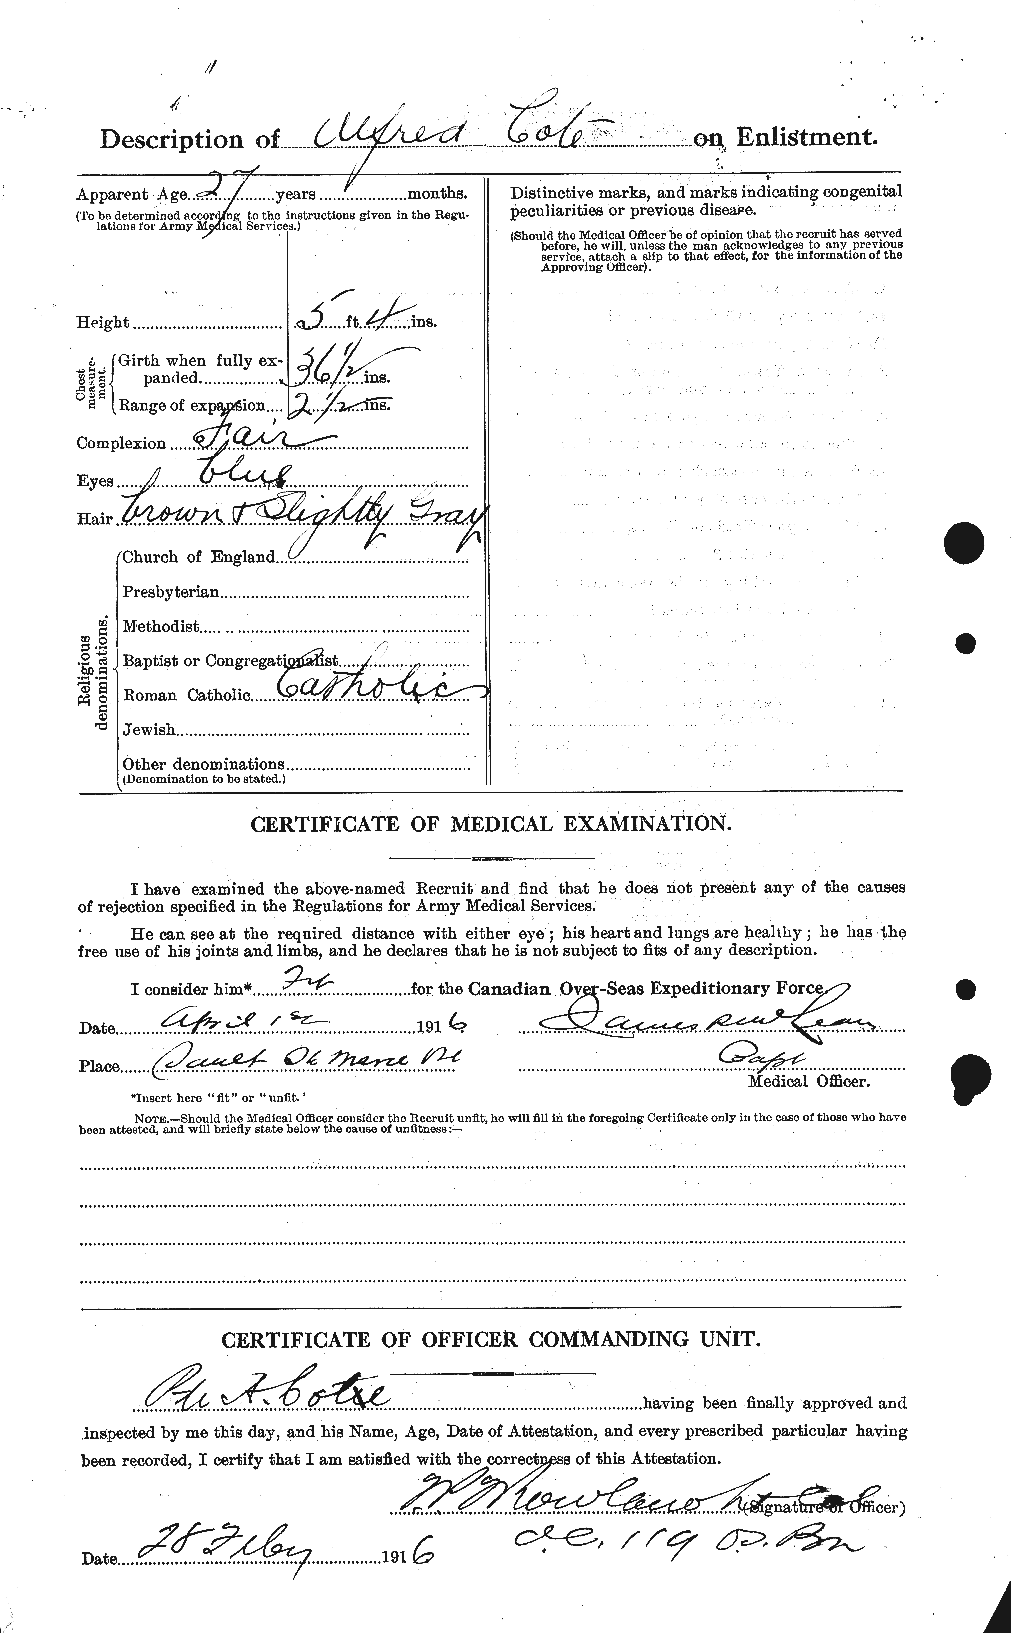 Personnel Records of the First World War - CEF 058854b